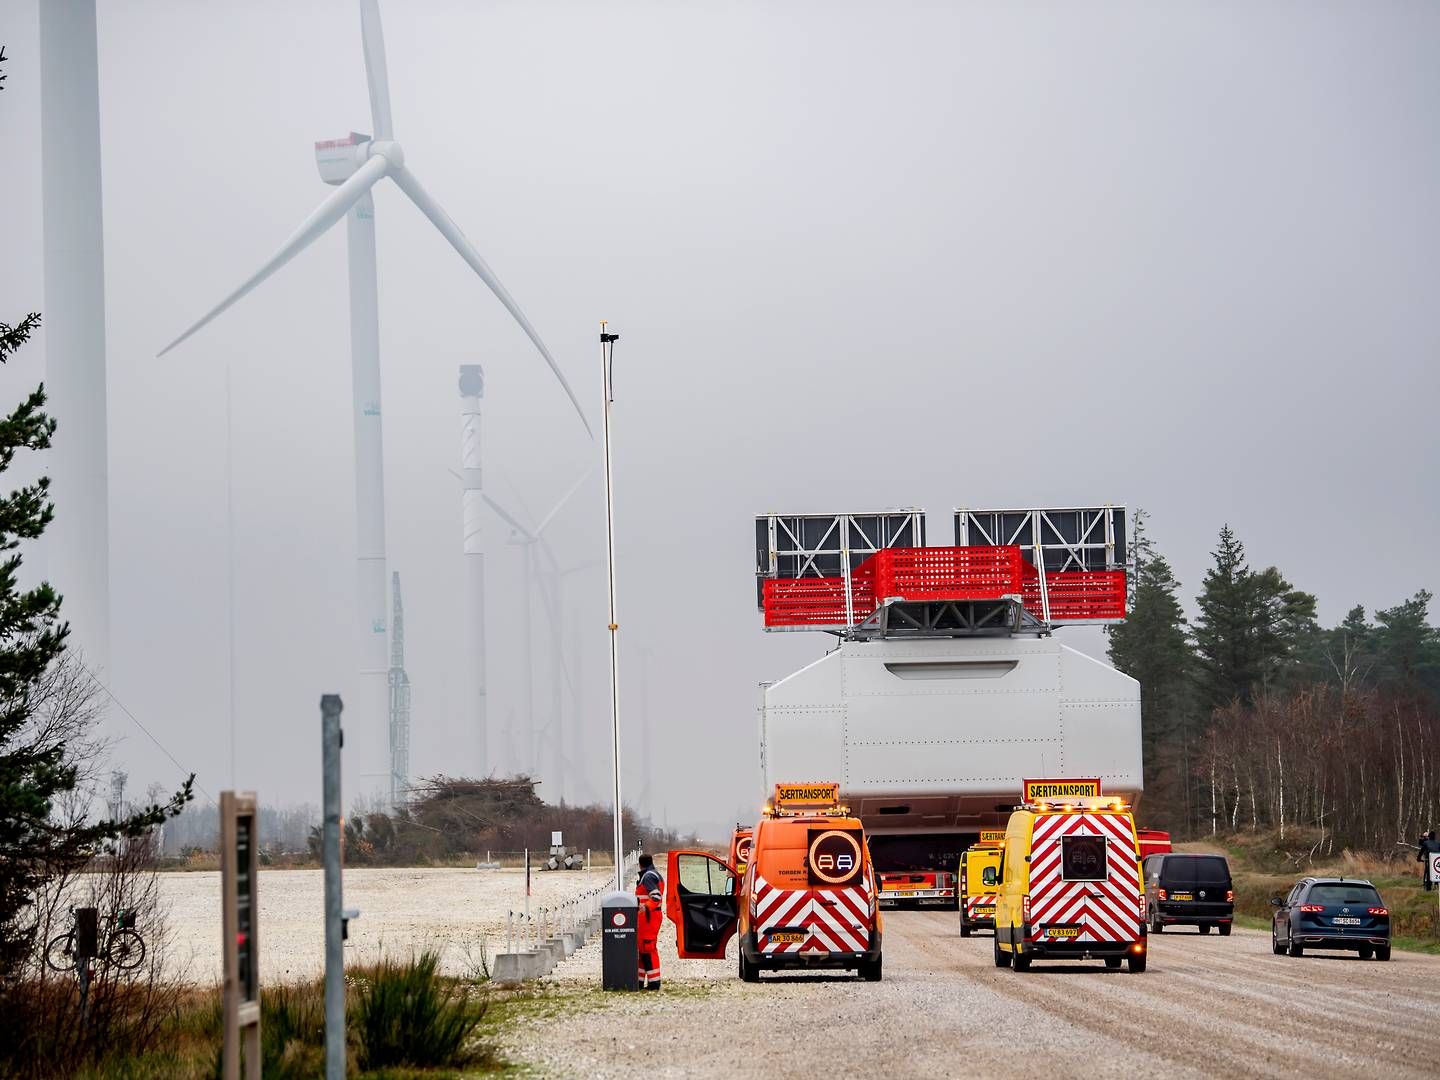 Here's a picture of what was, at the end of 2022, the world's largest wind turbine transportation. It looks a little more exciting than an image of the ISO/IEC 81346-10 standard. | Photo: René Schütze